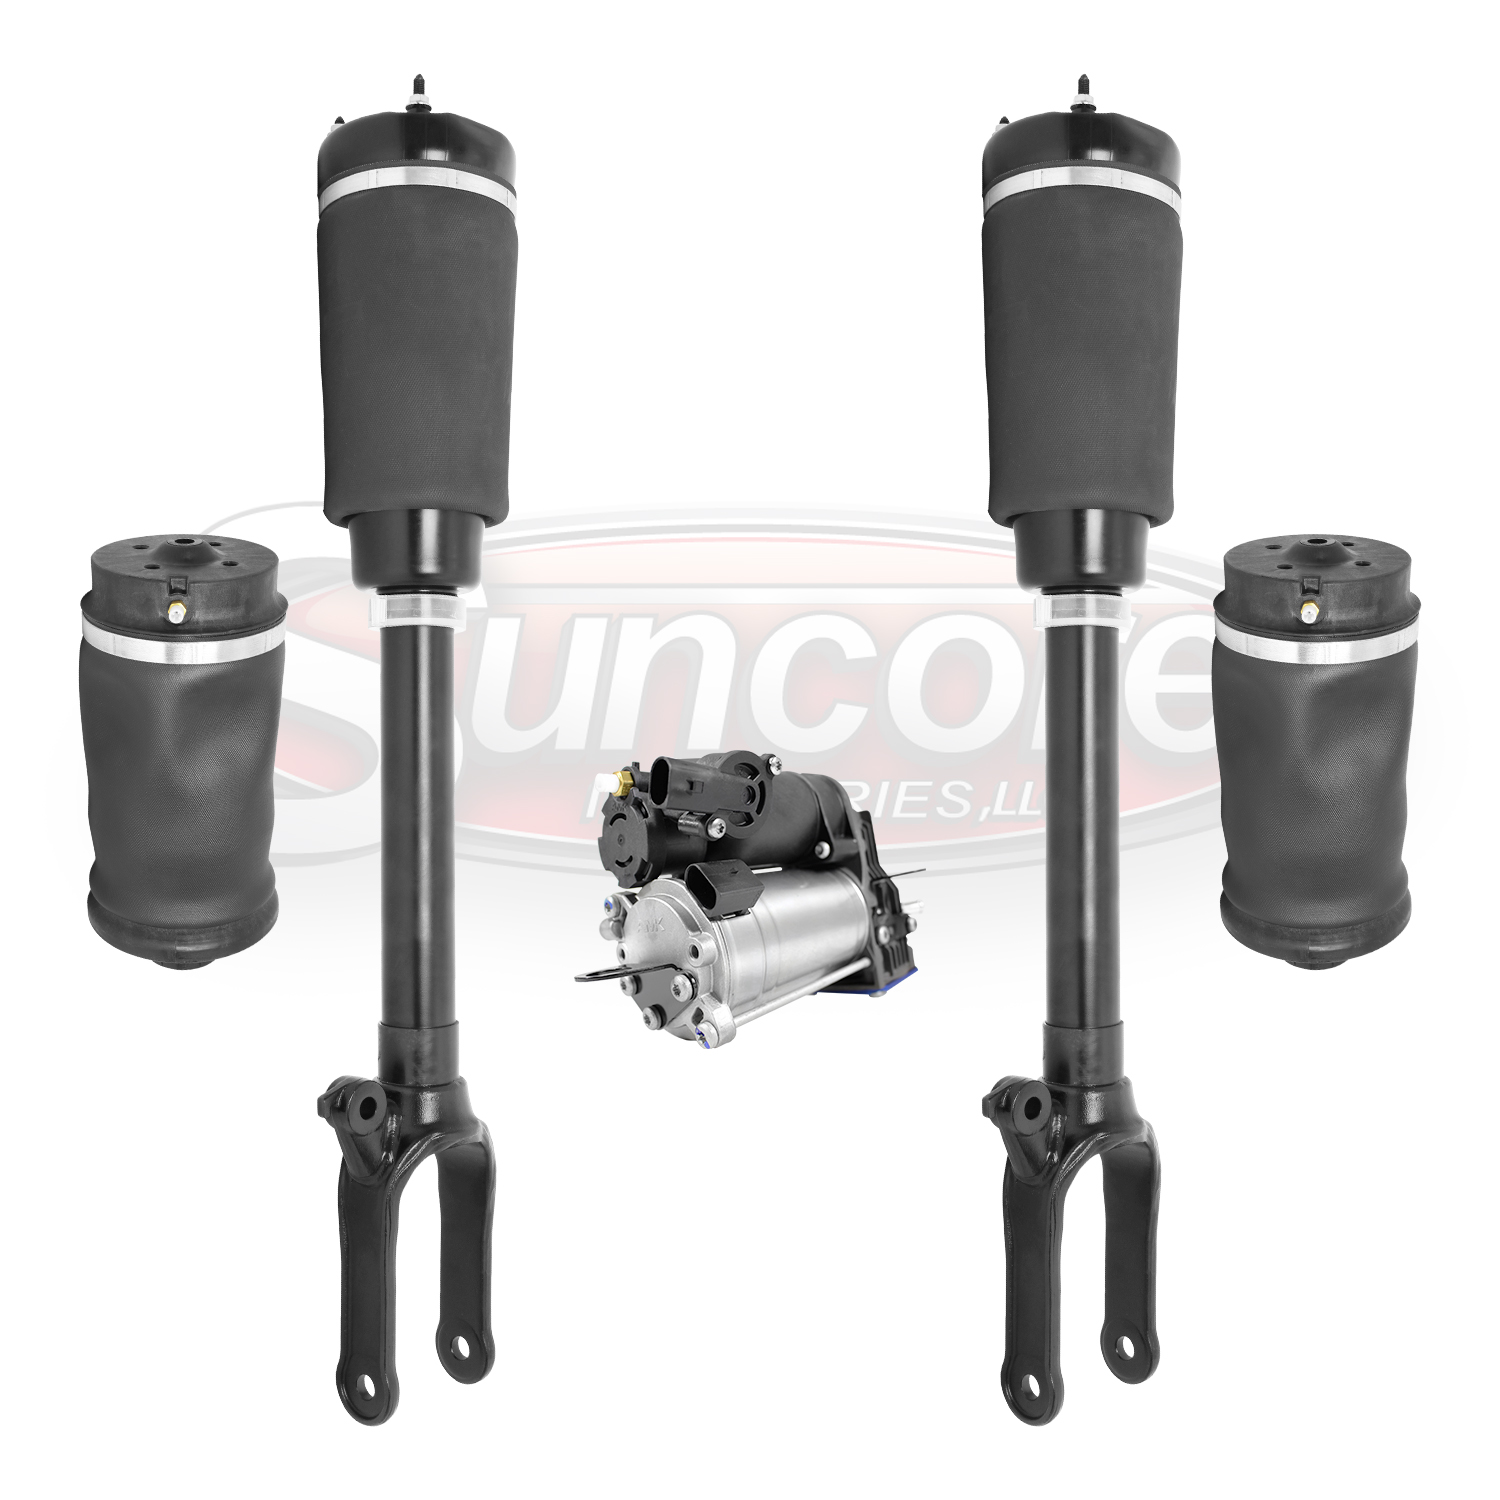 Mercedes GL320, GL350, GL450, GL550 Airmatic Suspension Air Strut Assemblies, Air Springs, & Compressor without ADS